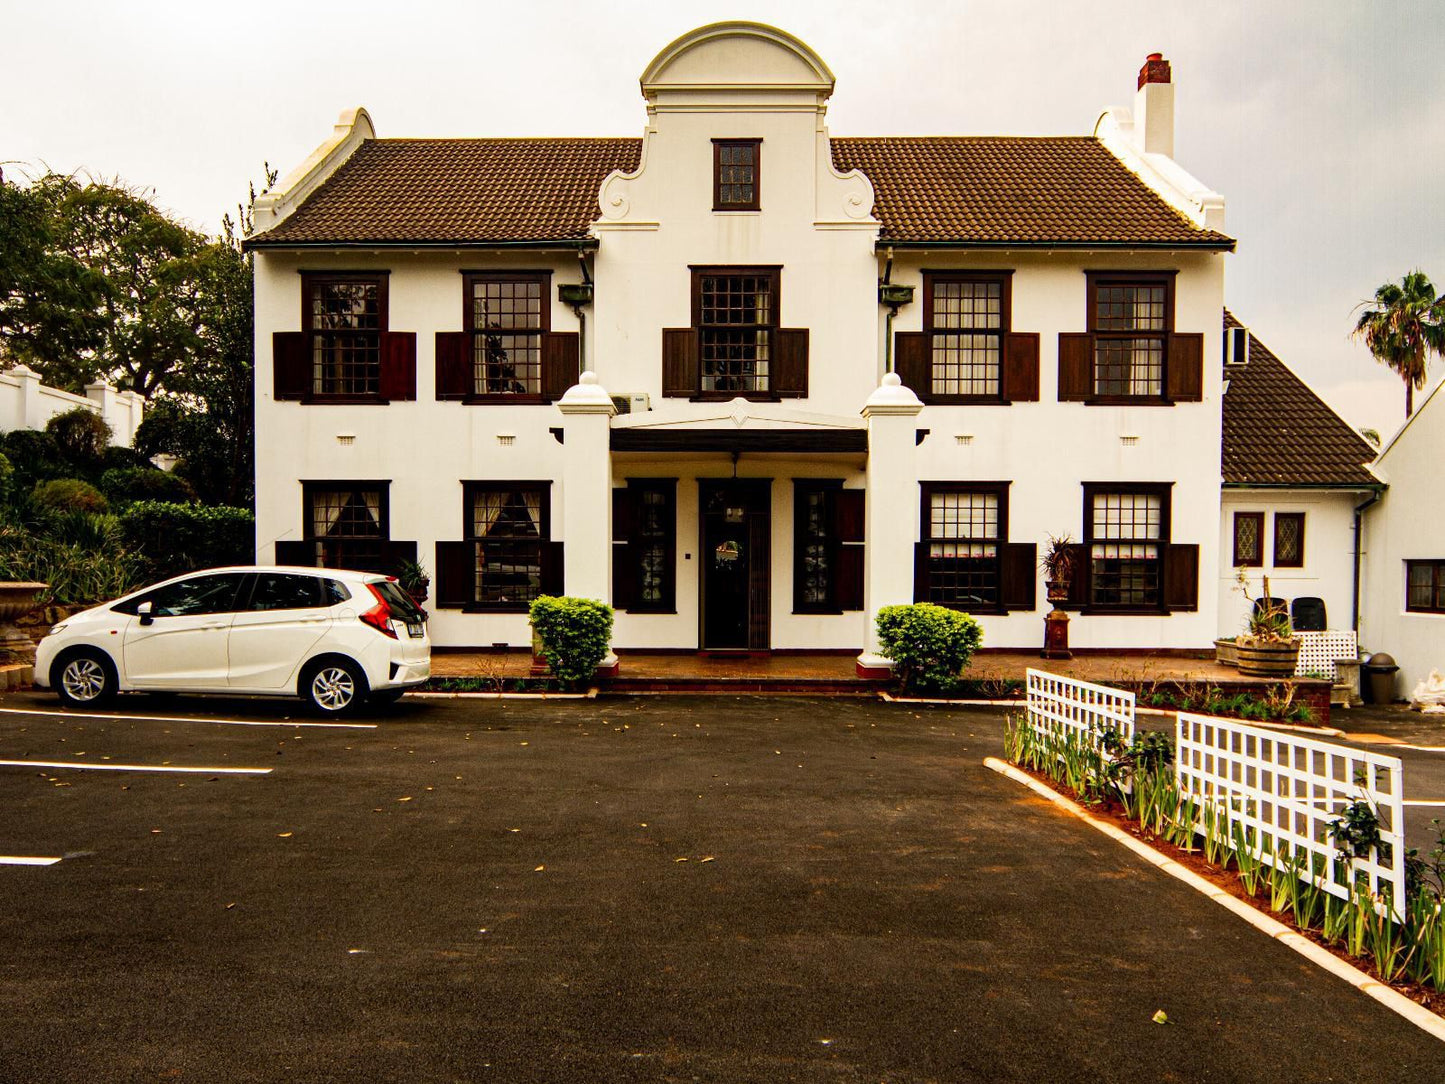 Holland House Windermere Durban Kwazulu Natal South Africa Building, Architecture, House, Window, Car, Vehicle